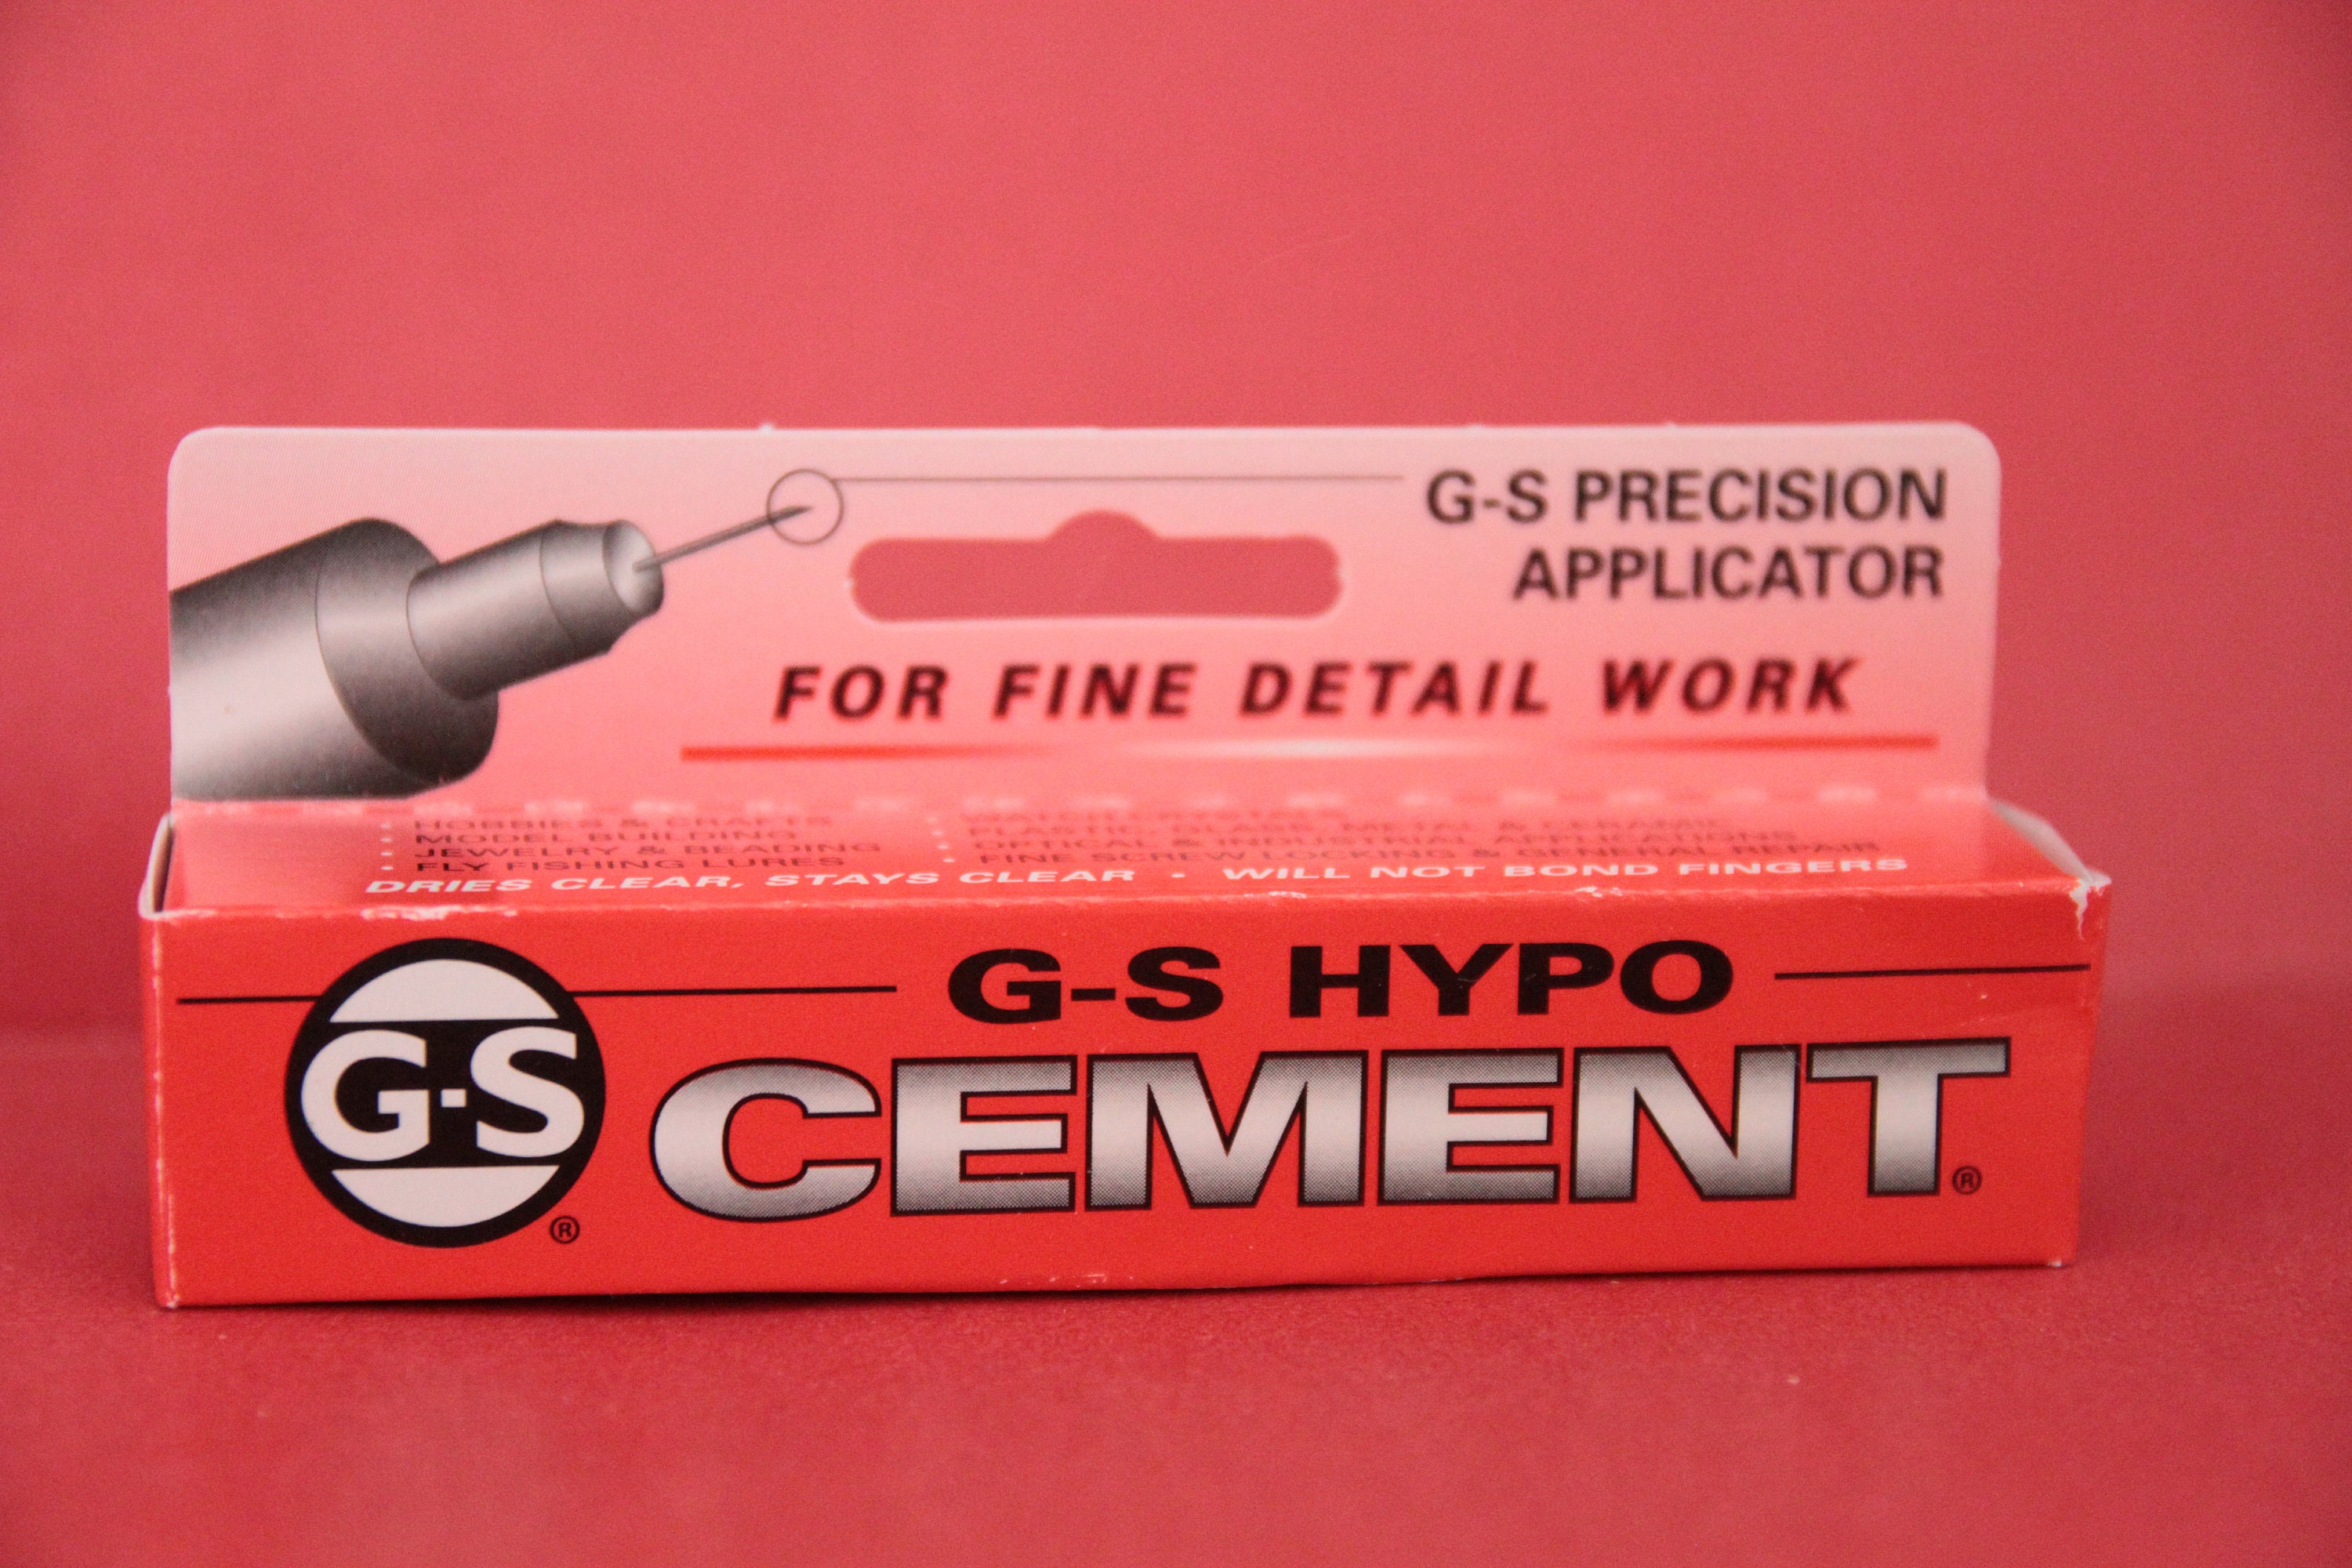 ImpressArt G-S Hypo Cement Jewelry Glue - Quickly Bonds Metal with other  surfaces for Jewelry Making Purposes - SGX001